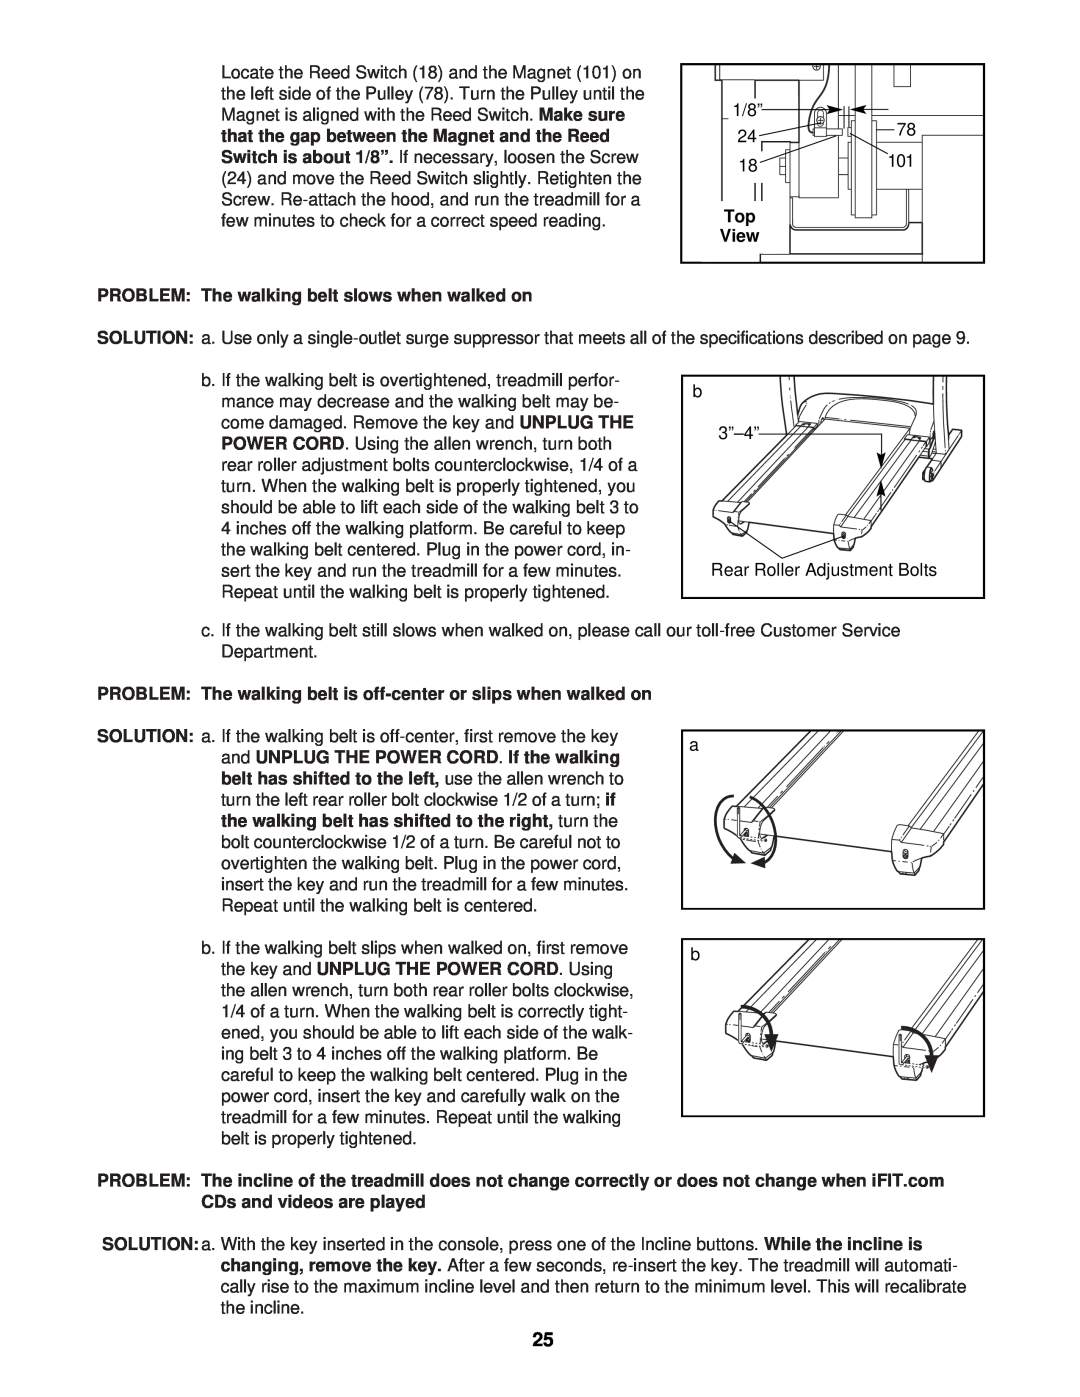 ProForm PFTL49721 user manual PROBLEM The walking belt slows when walked on, View 